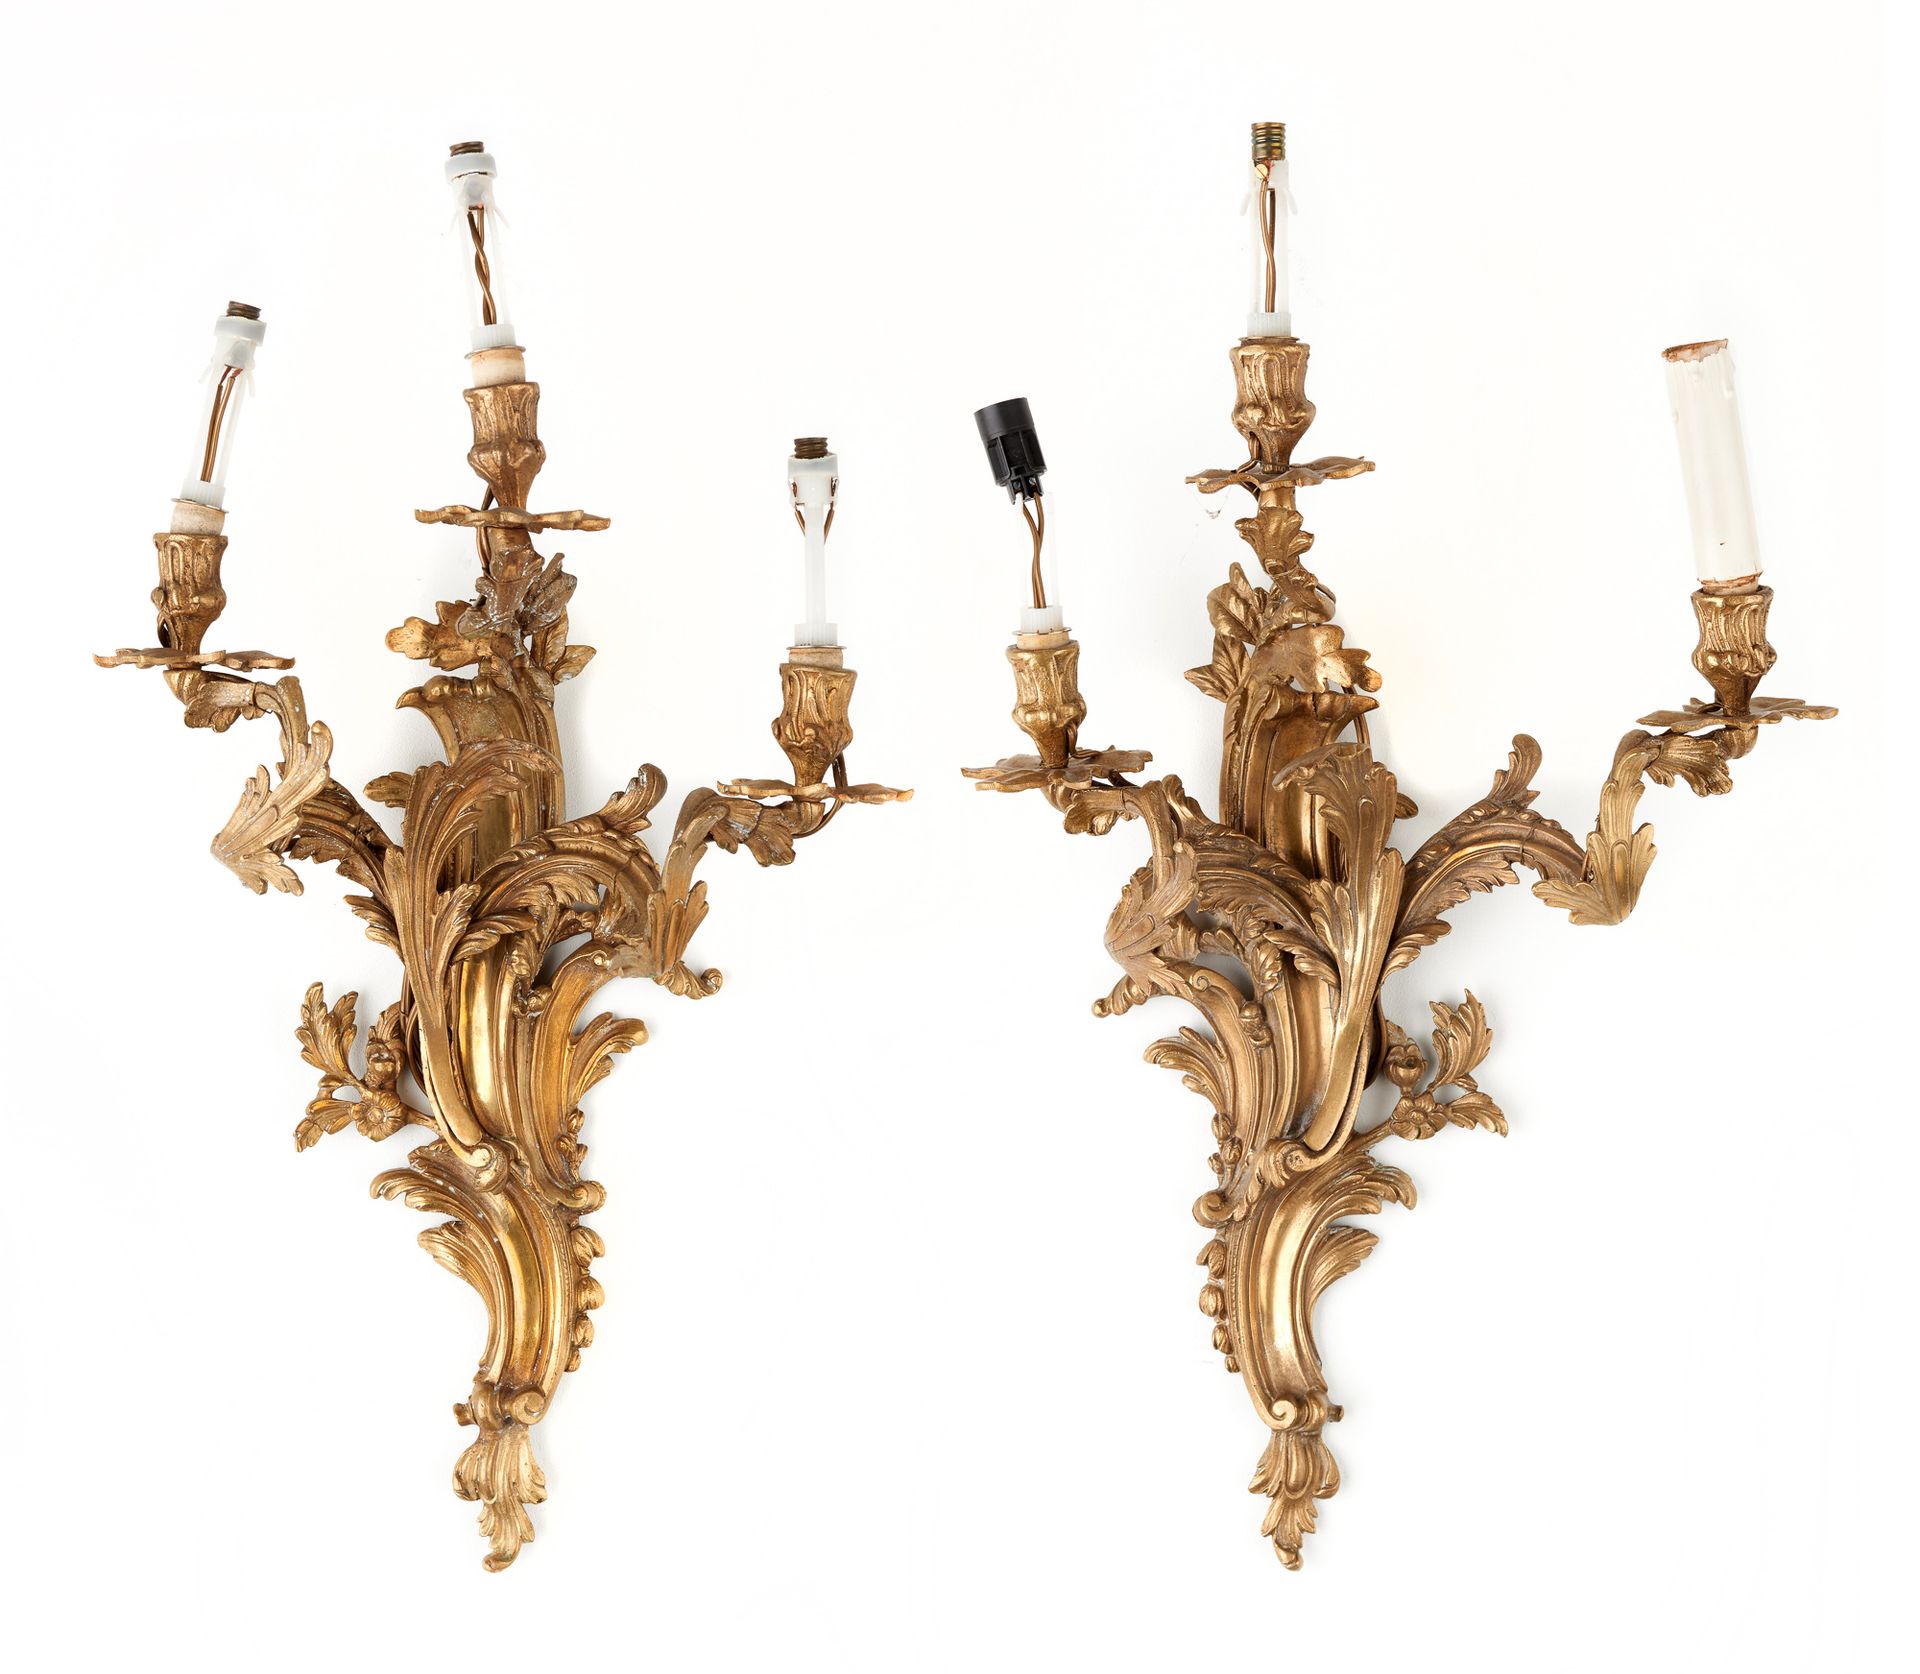 De style Louis XV. Lighting: Pair of gilt bronze sconces with three arms of ligh&hellip;